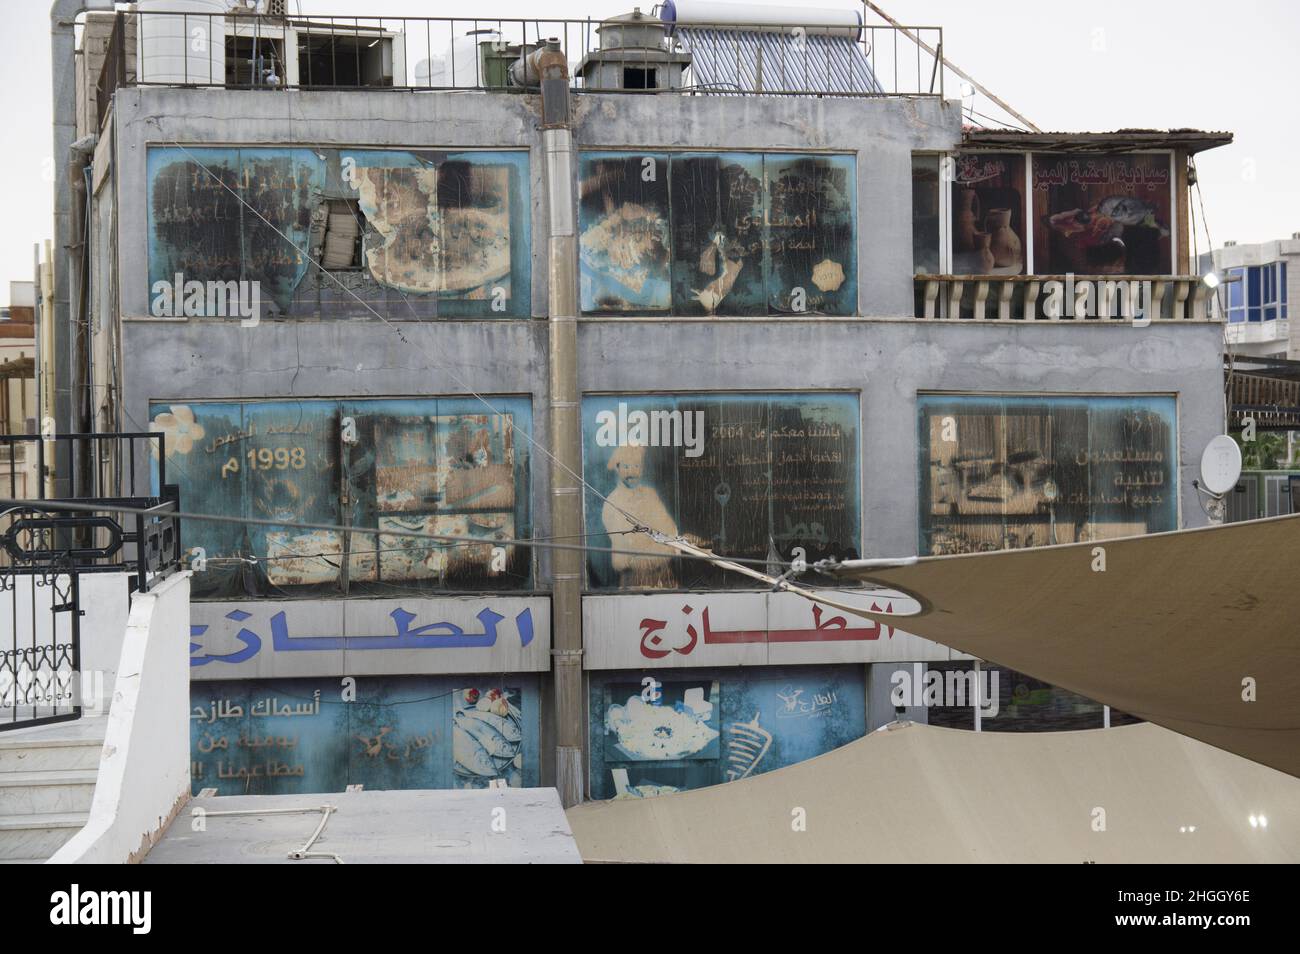 Faded and windswept billboards on a building in Aqaba Jordan depicting bread making and a restaurant and Arabic writing and torn awnings. Stock Photo